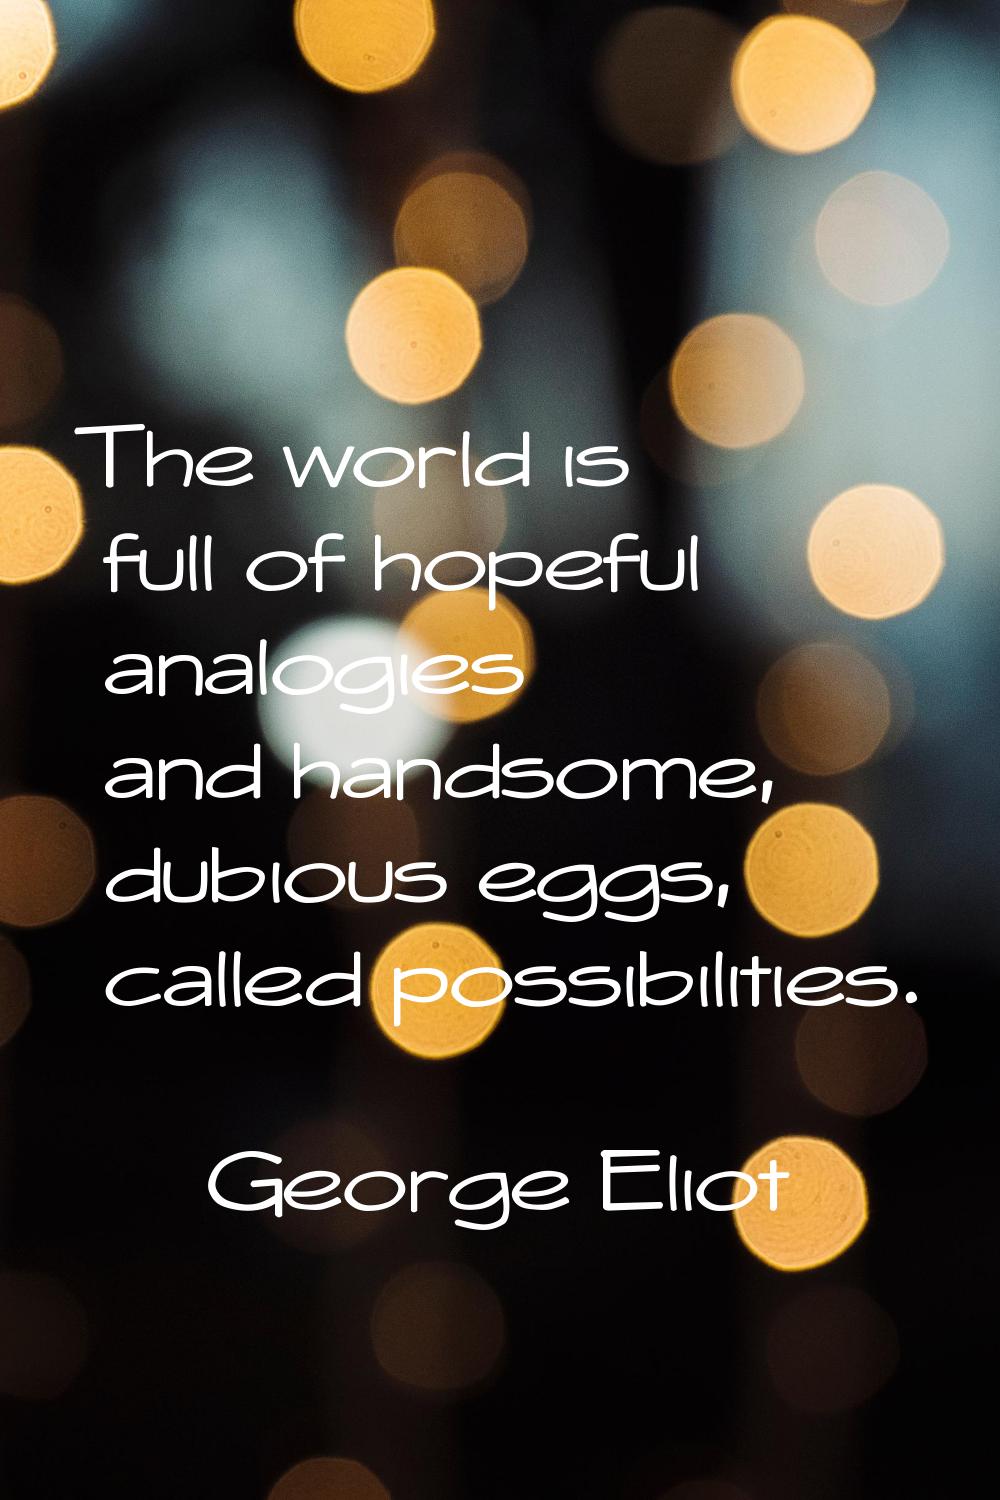 The world is full of hopeful analogies and handsome, dubious eggs, called possibilities.